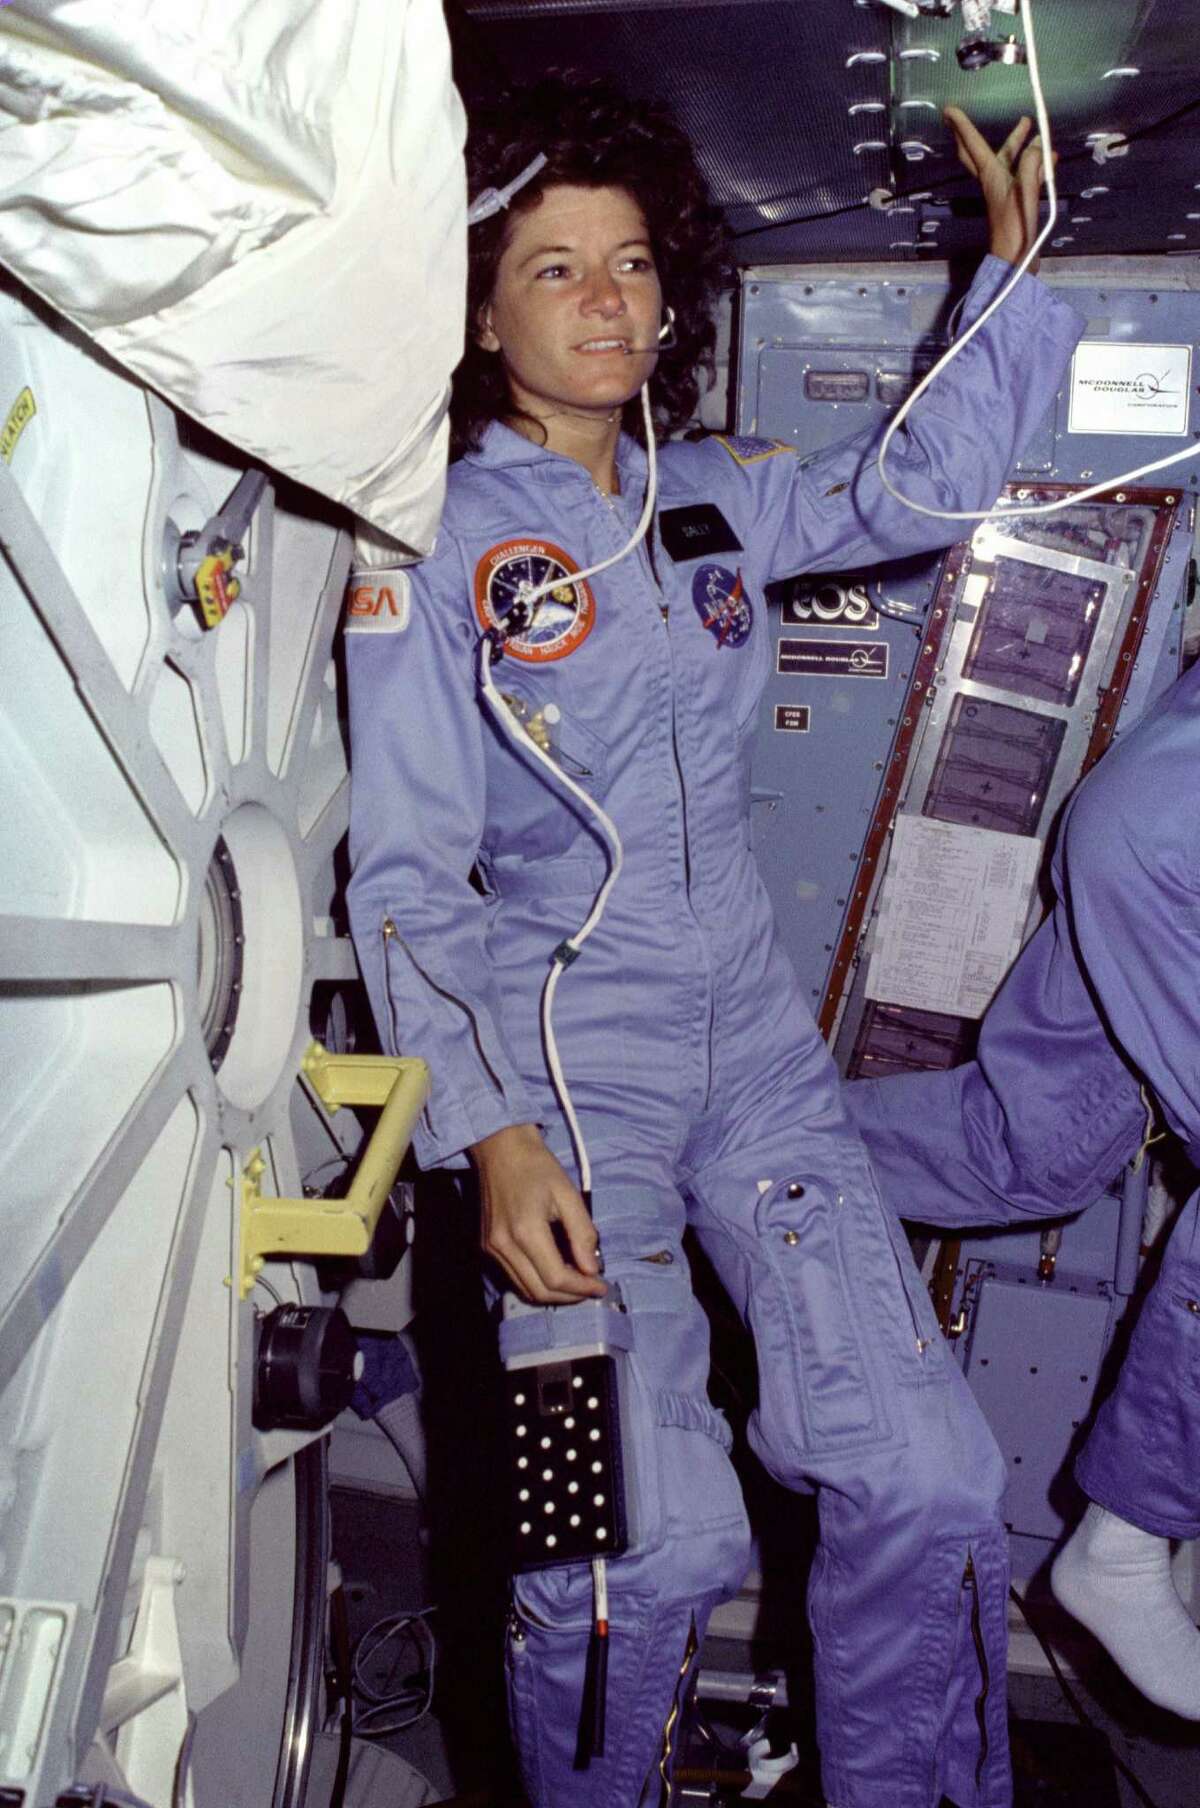 Sally Ride, 1943-2012 Astronaut and first American woman in space